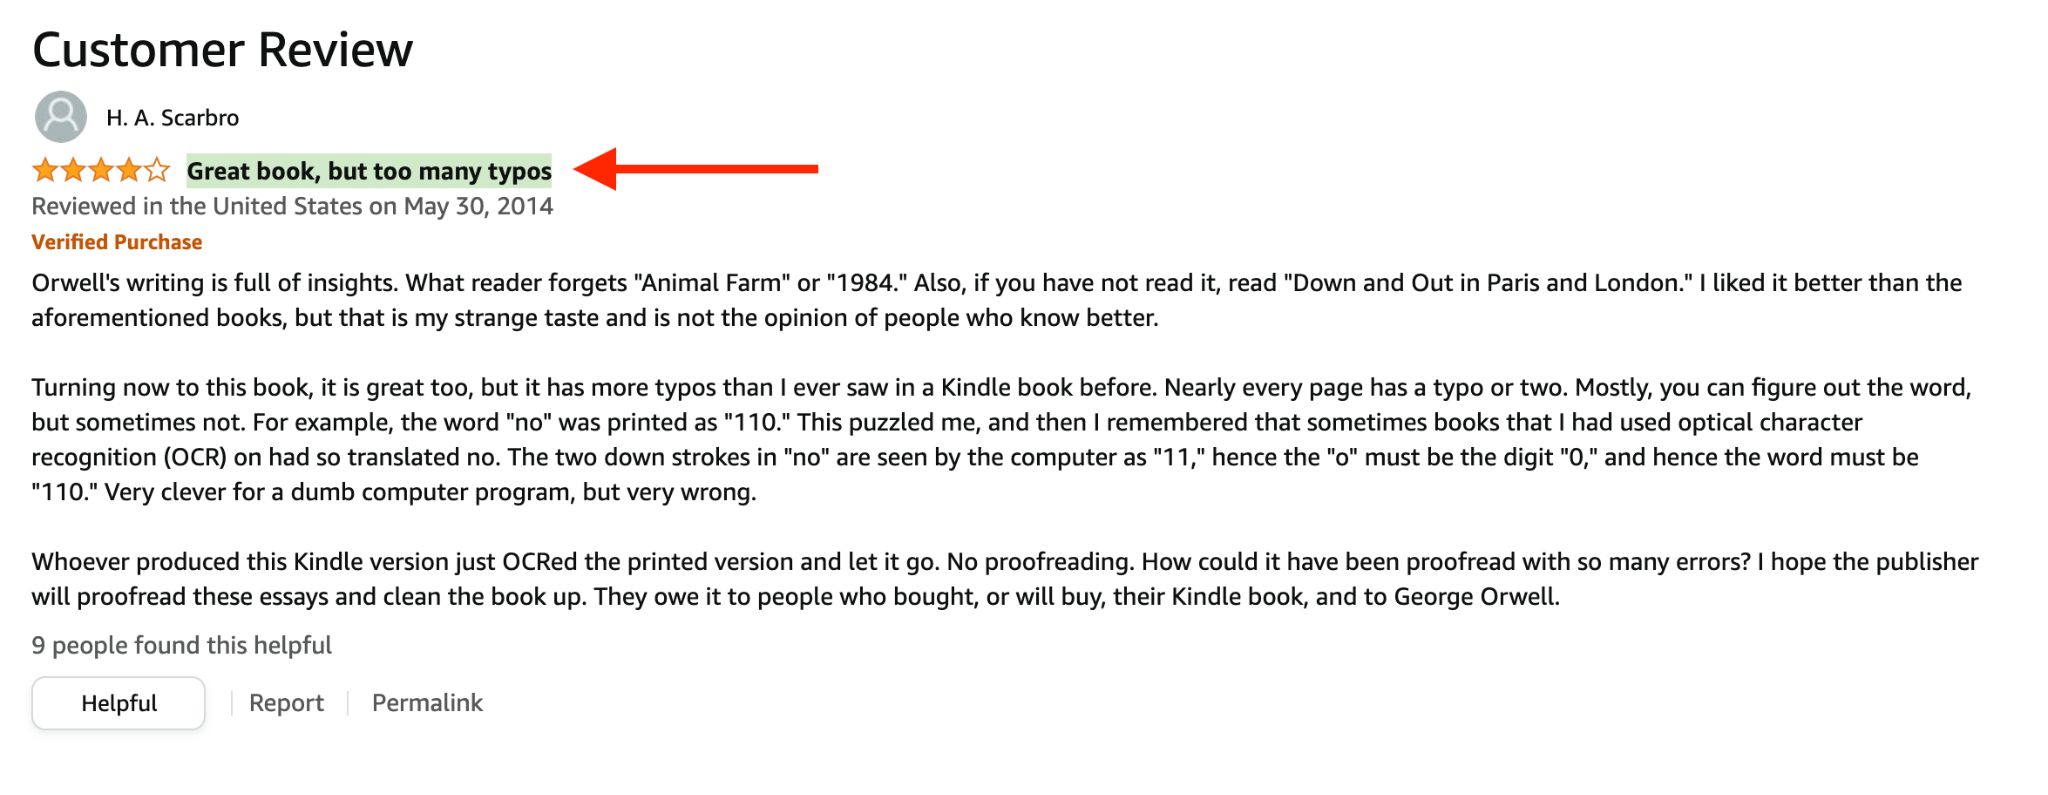 customer review on ebook - typos